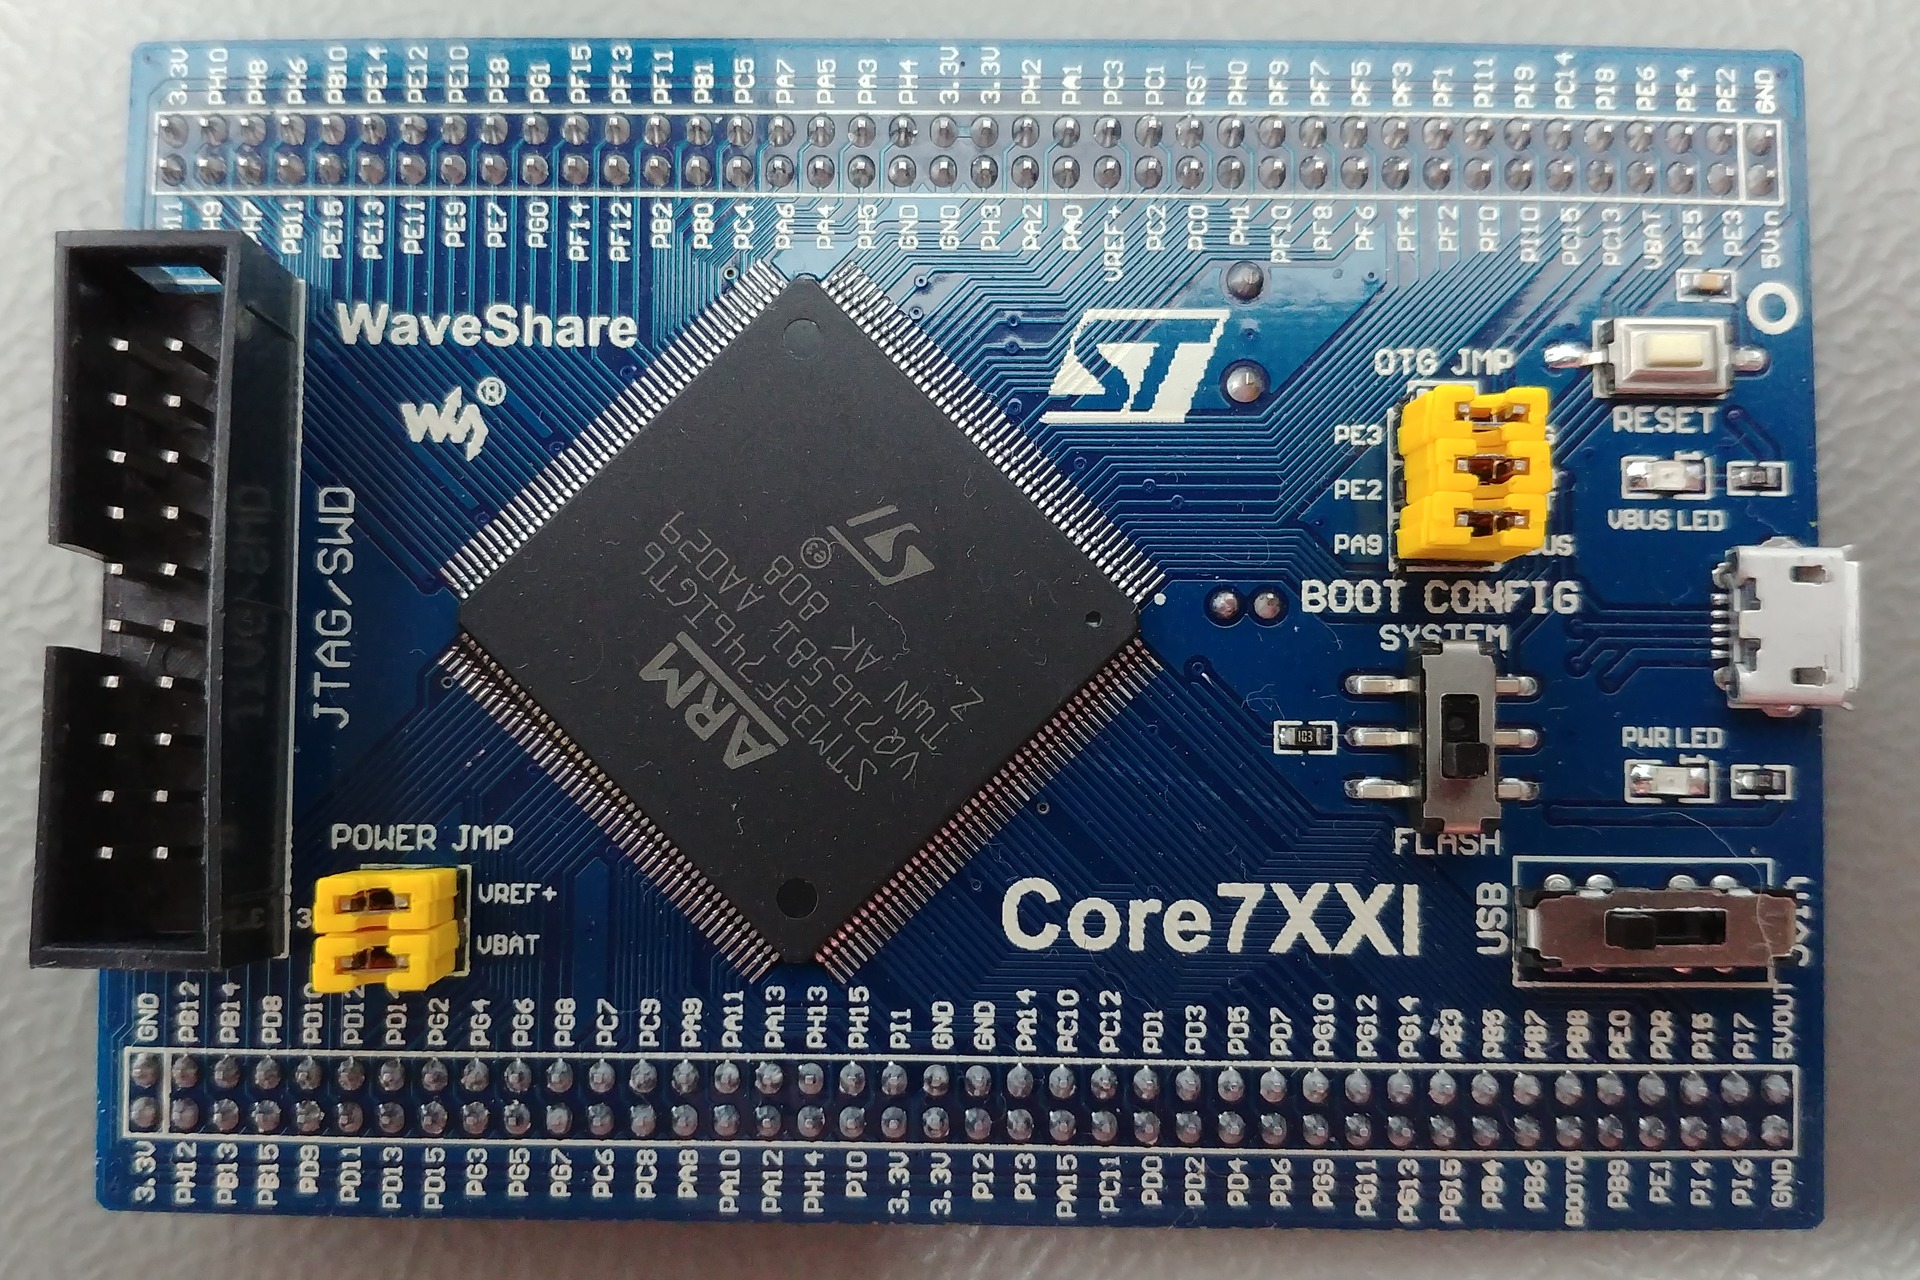 WaveShare Core746I board: Top view